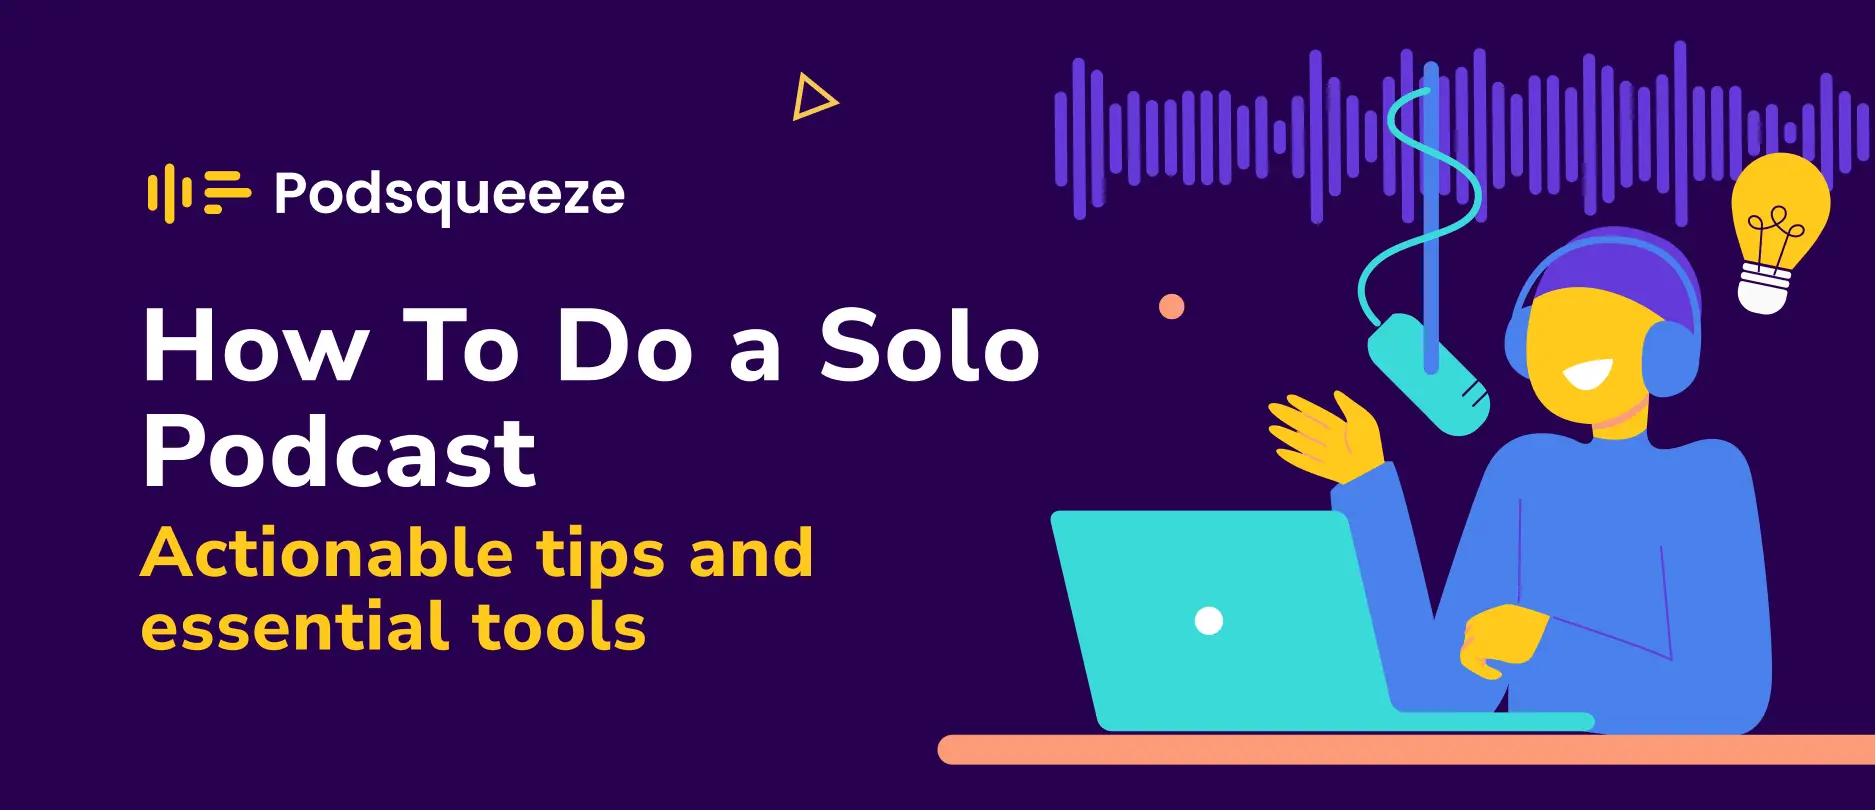 How-to-do-a-solo-podcast